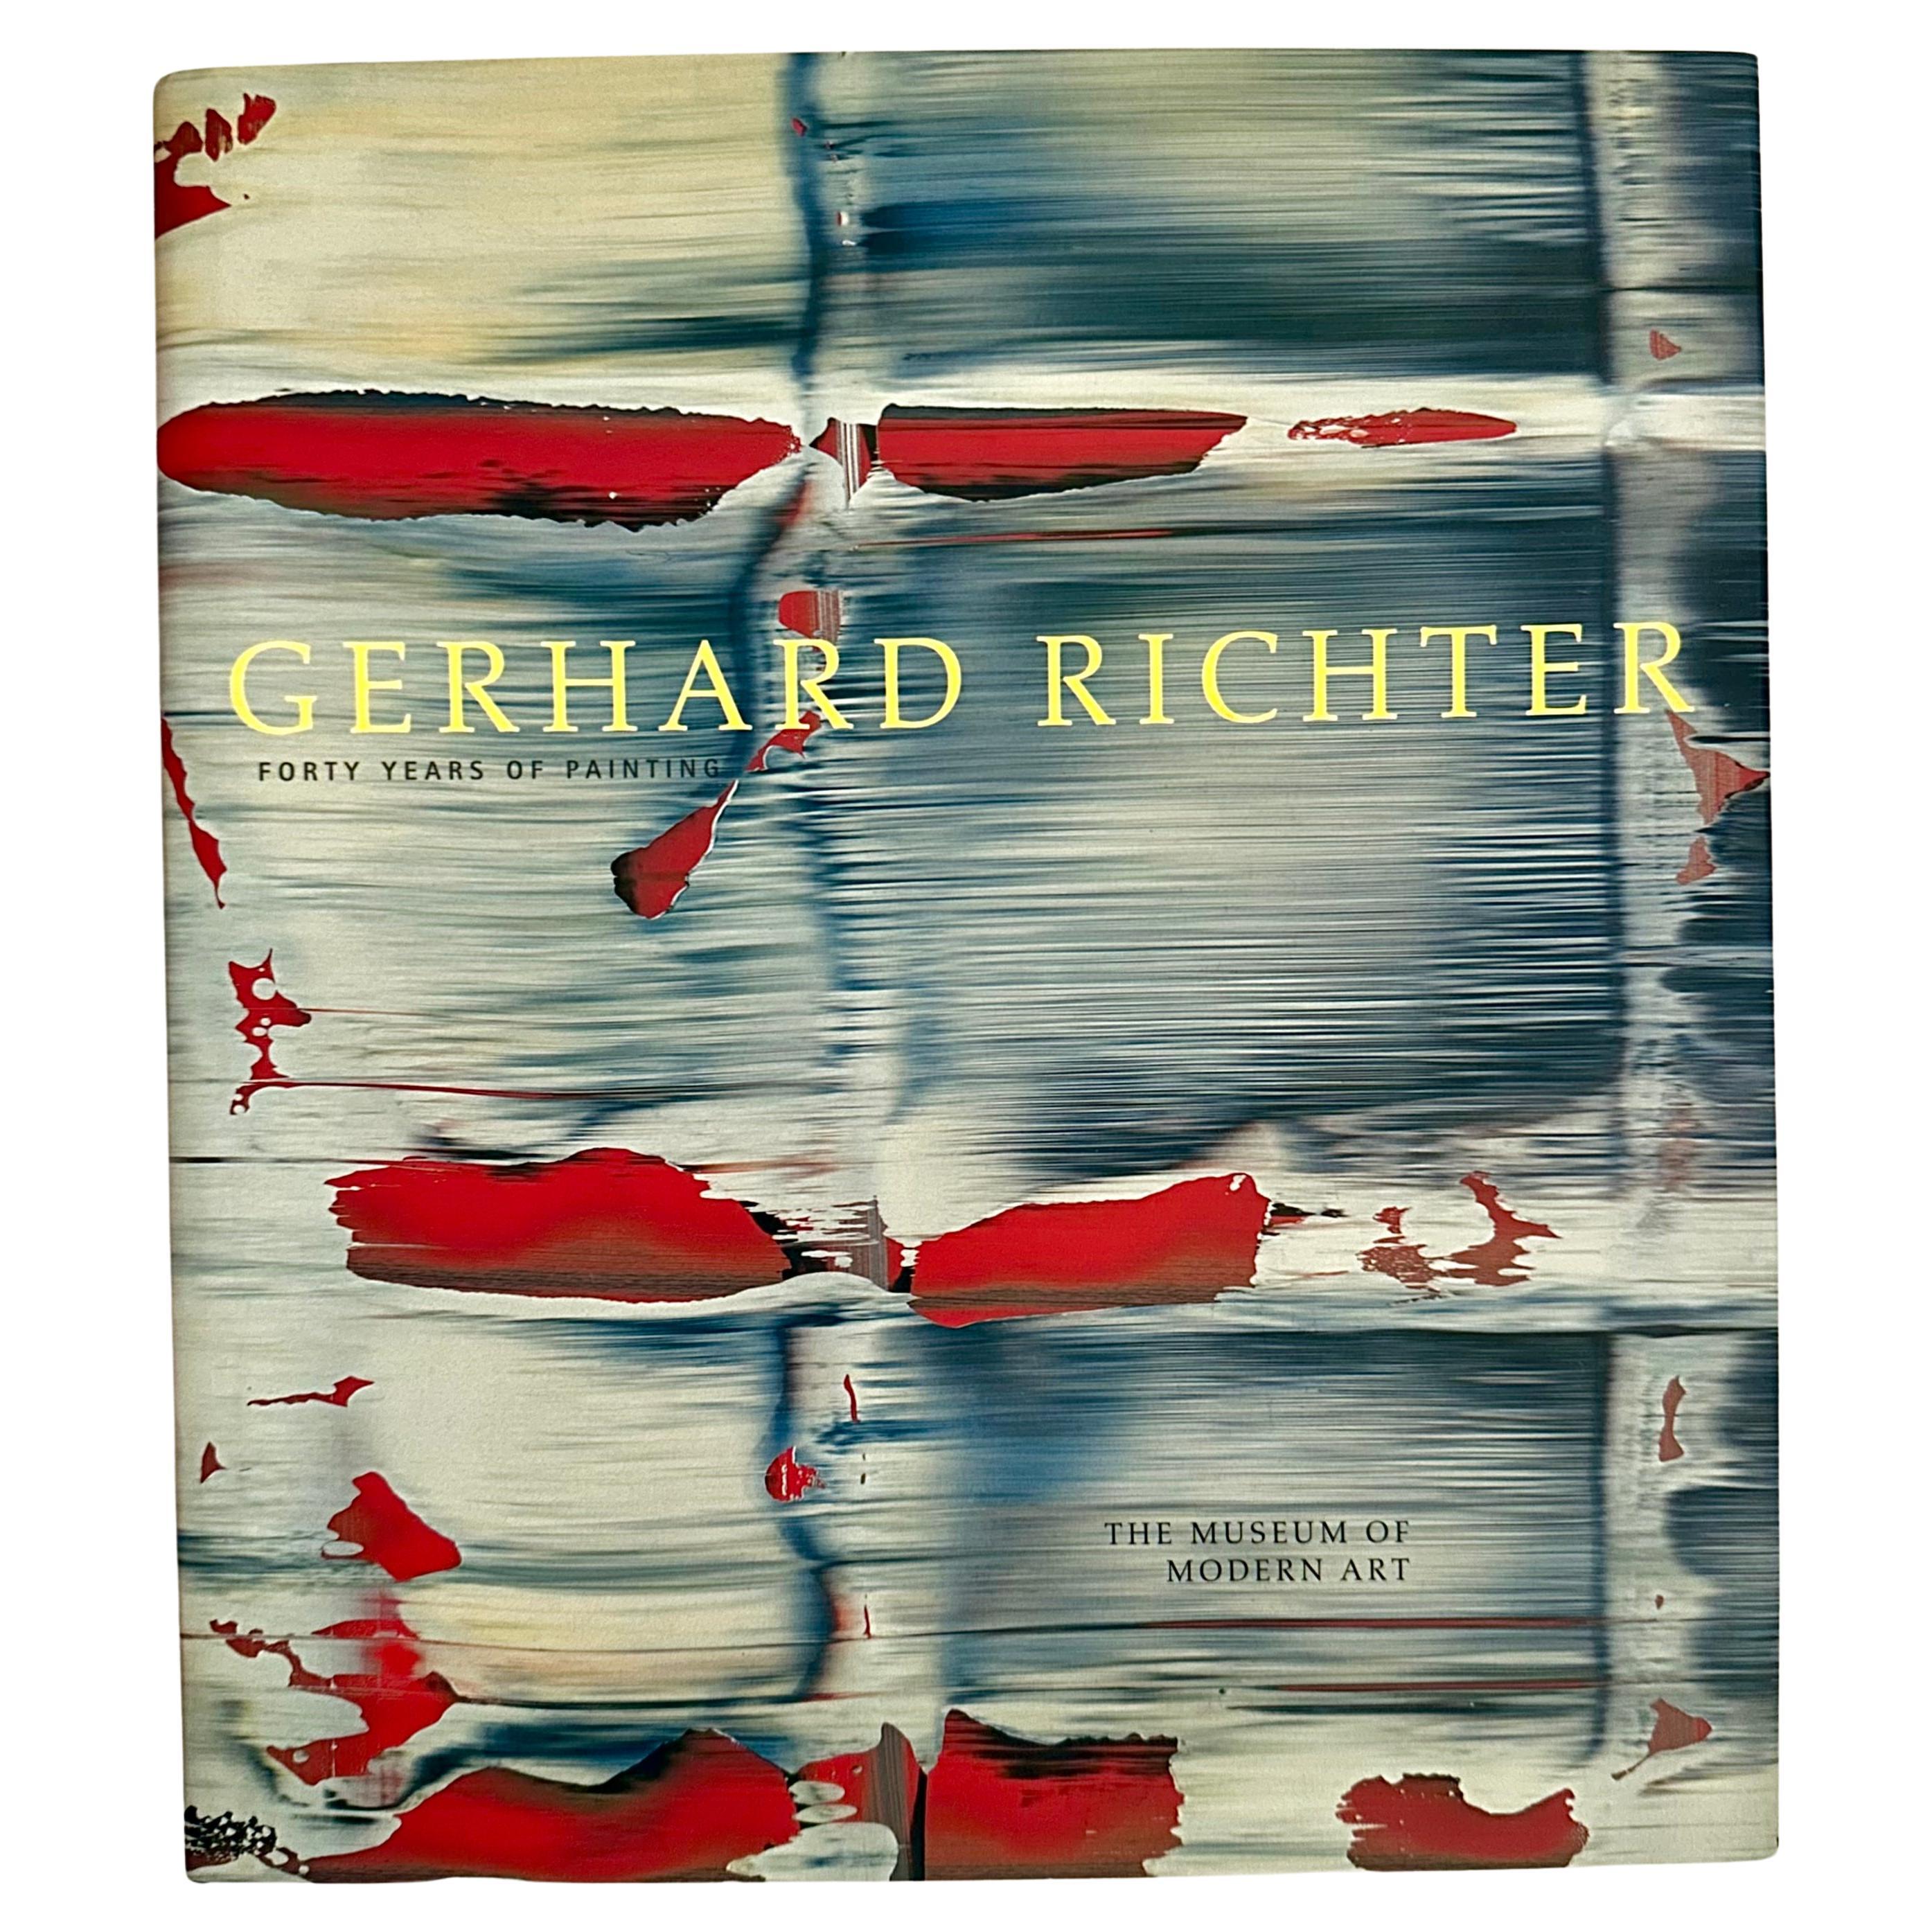 Gerhard Richter: Forty Years of Painting - Robert Storr - 1st Edition, 2002 For Sale